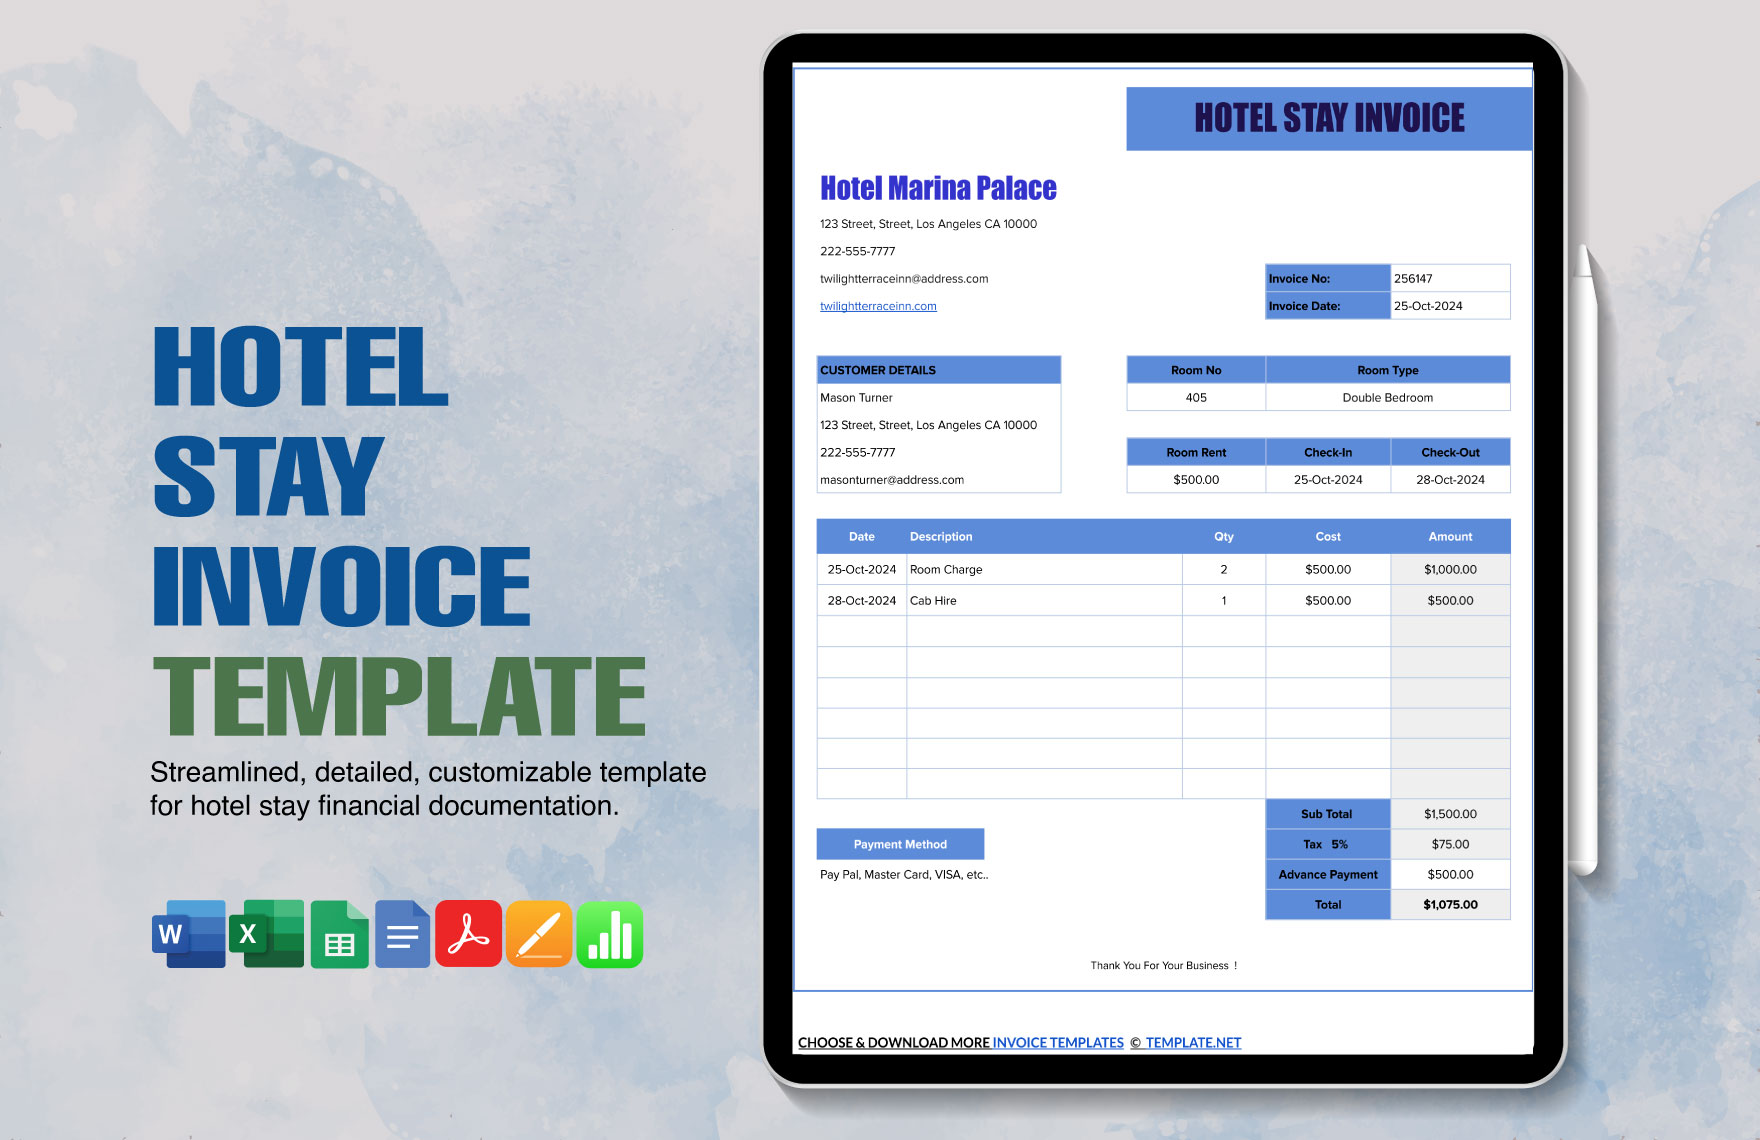 Free Hotel Stay Invoice Template in Word, Google Docs, Excel, PDF, Google Sheets, Apple Pages, Apple Numbers